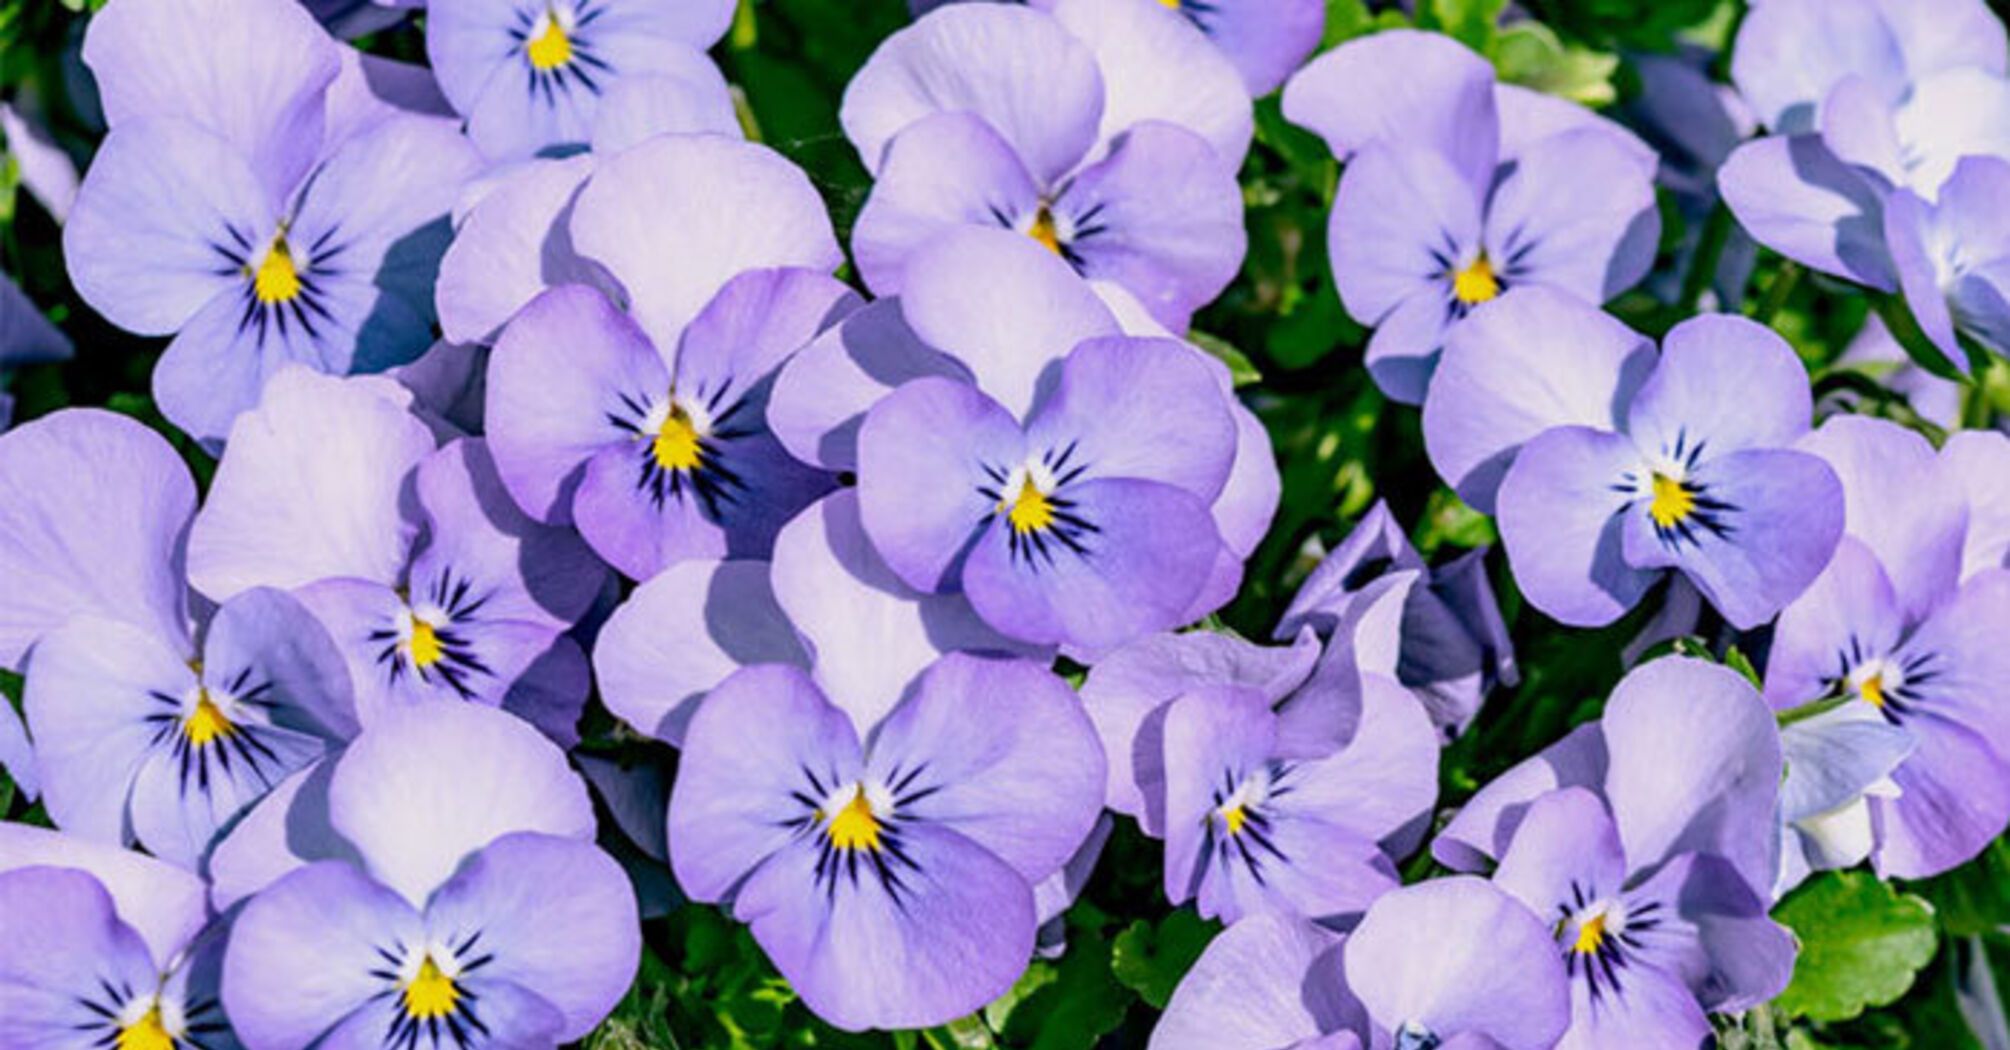 Superstitions about violets